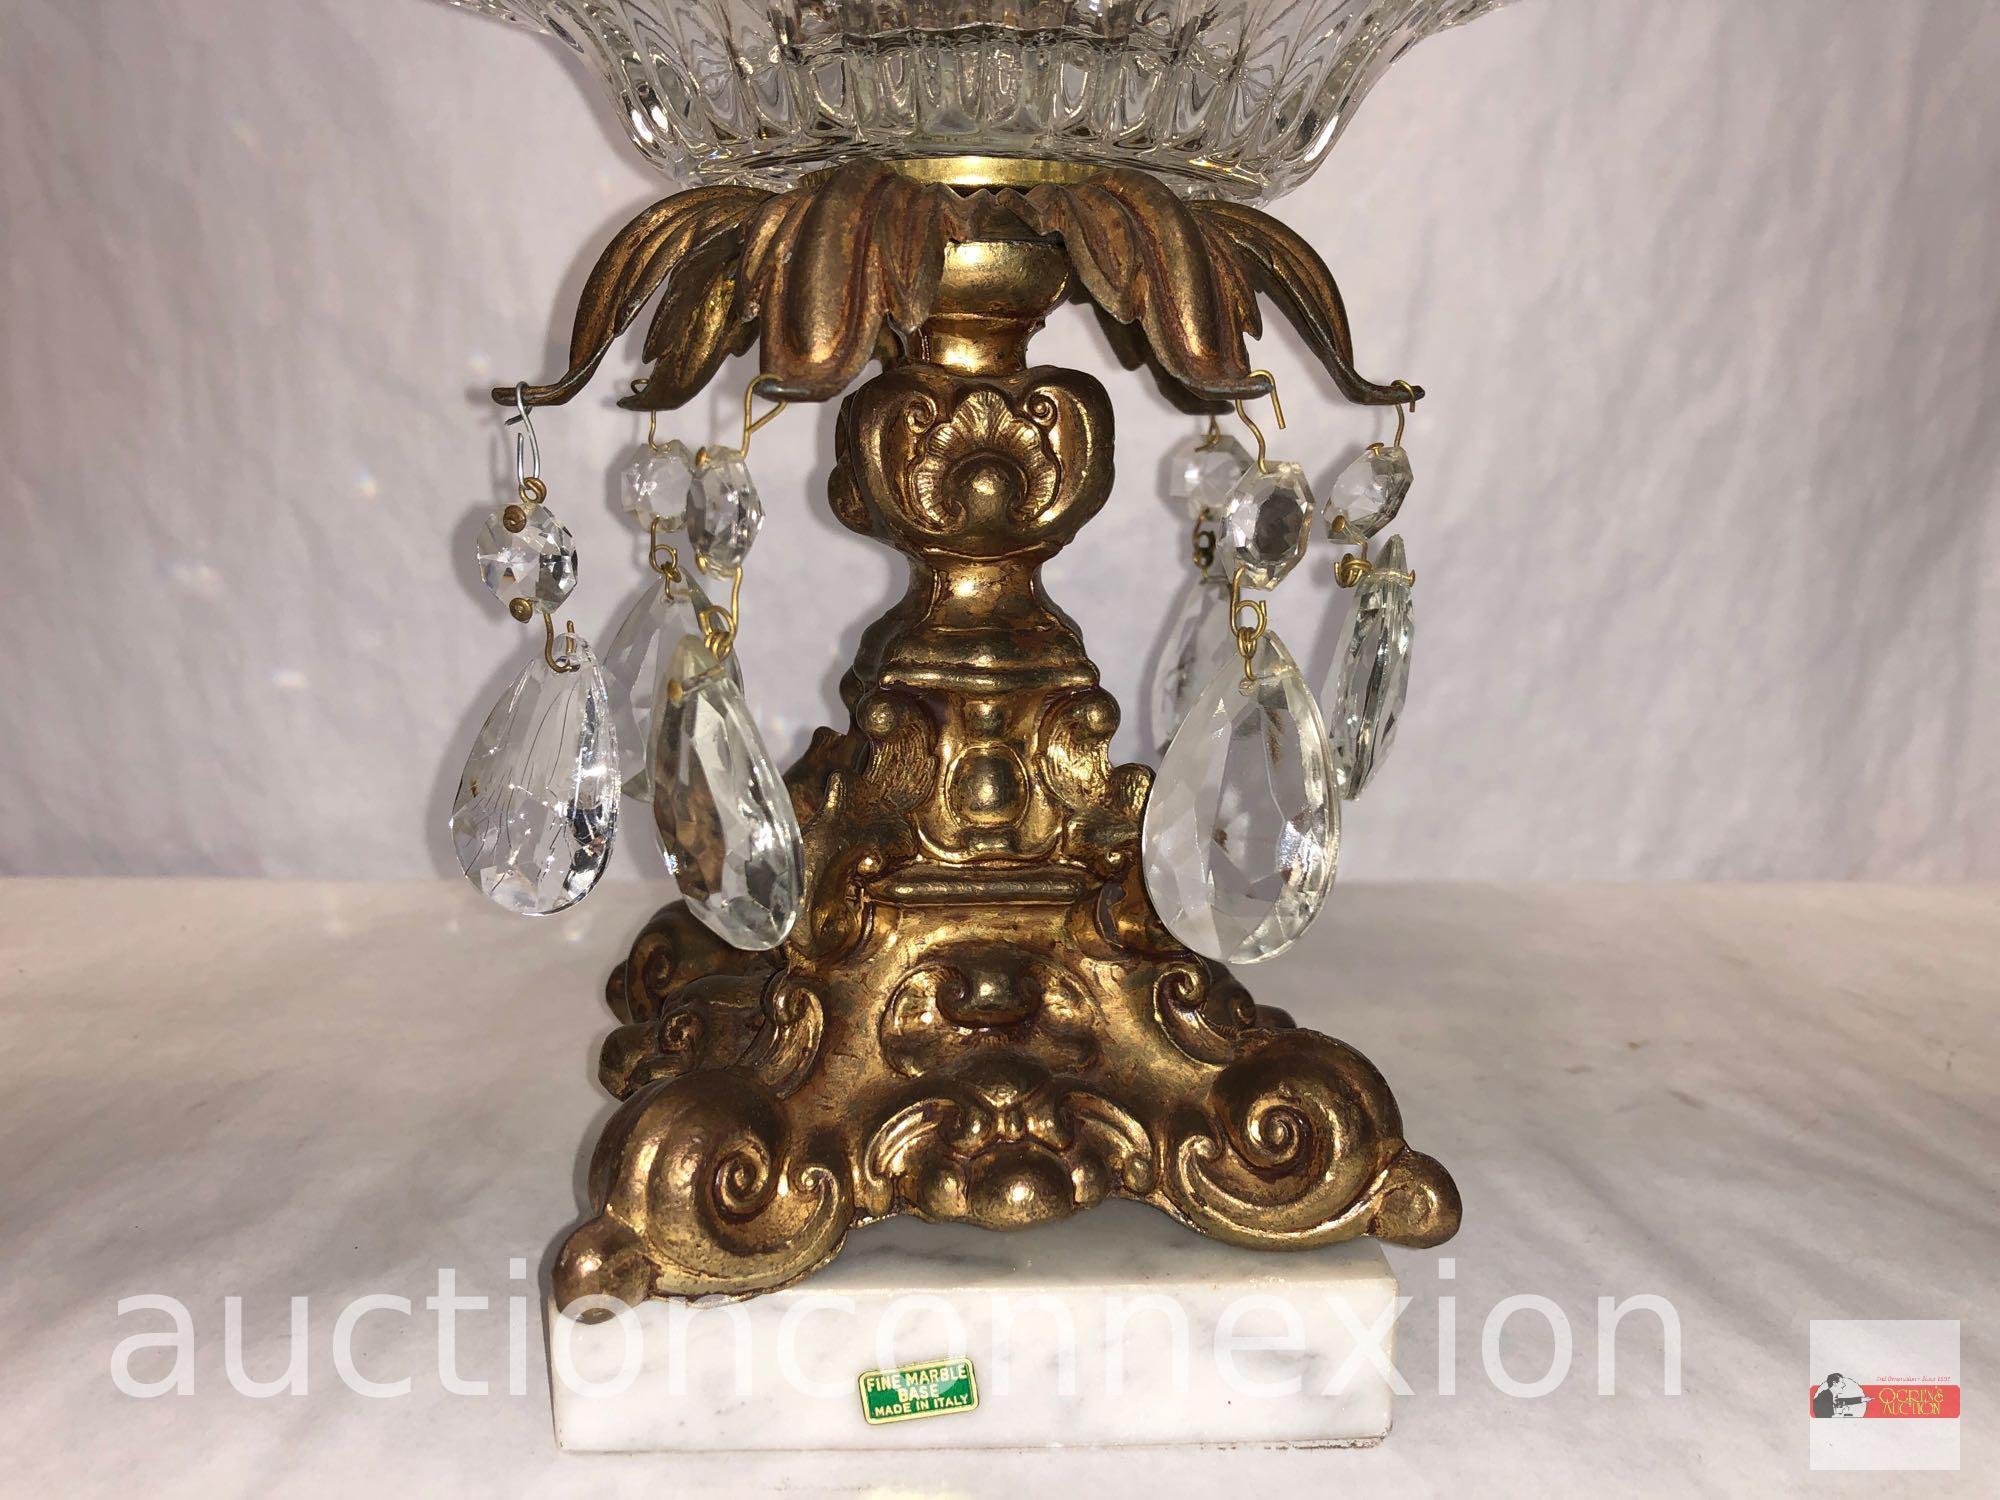 Ornate pedestal decor dish with prisms, Genuine Monarch crystal, made in West Germany on Marble base